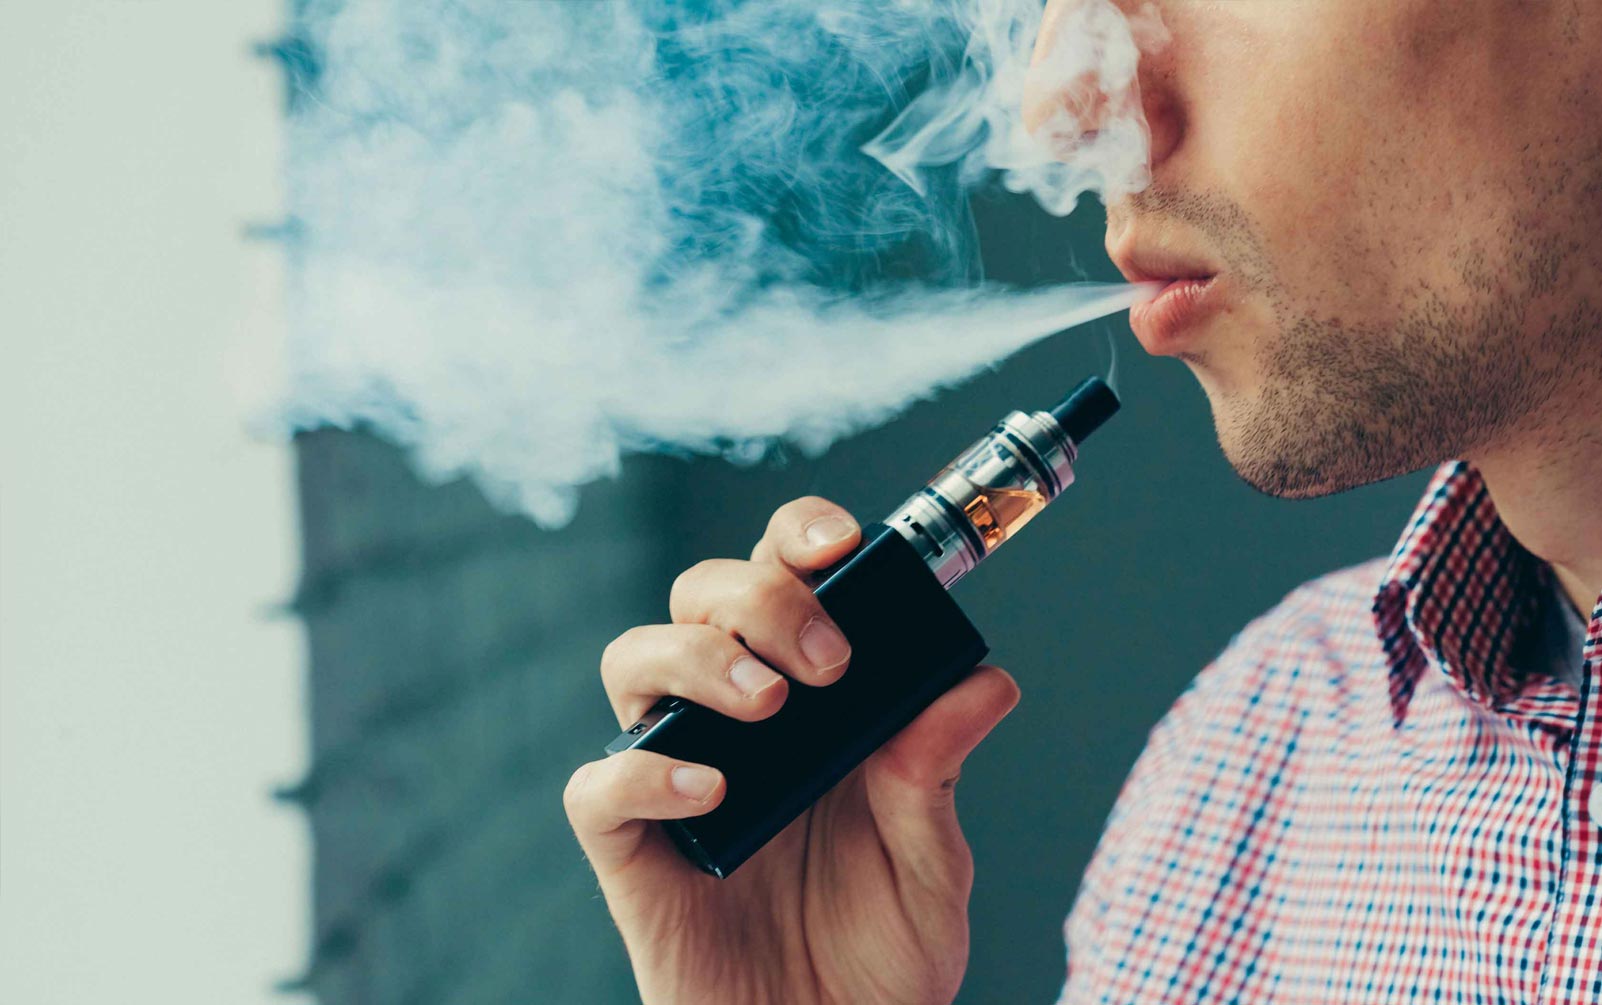 Should Physicians Recommend E-Cigarettes to Their Lung Cancer Patients Who Smoke? What About Their Family
            Members Who Also Smoke?